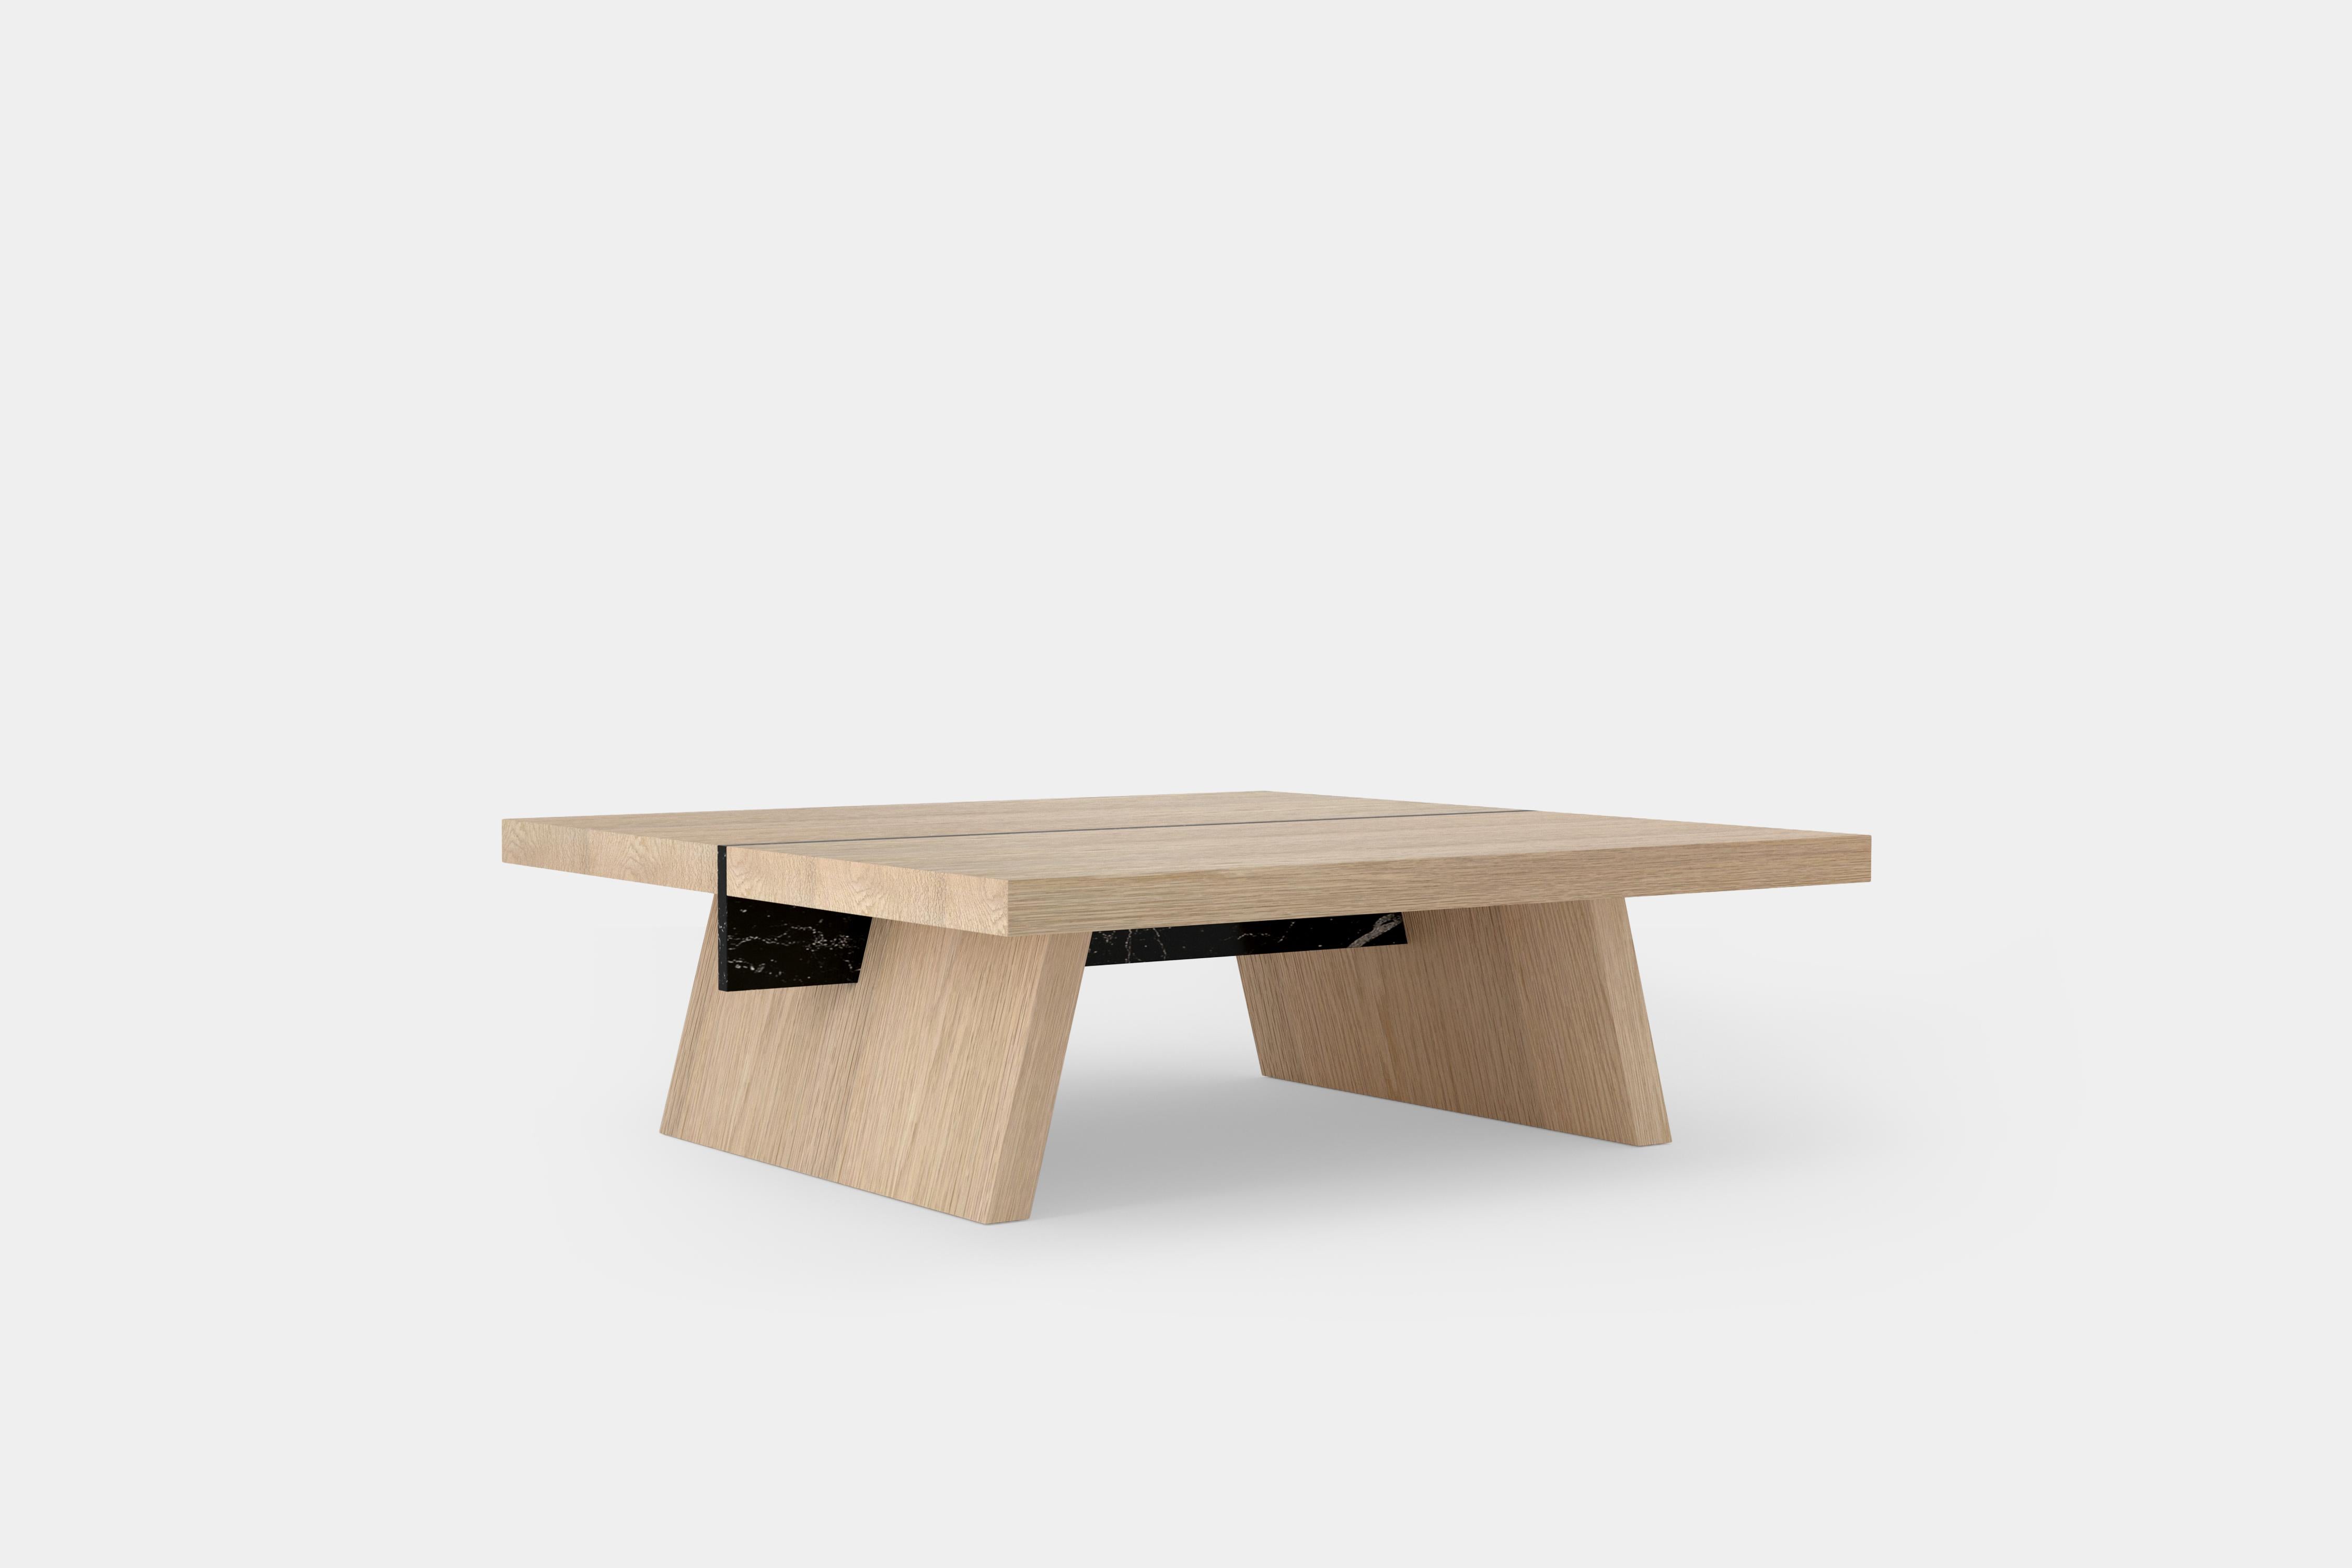 Mexican Laws of Motion Square Coffee Table in Oak Solid Wood and Marble by Joel Escalona